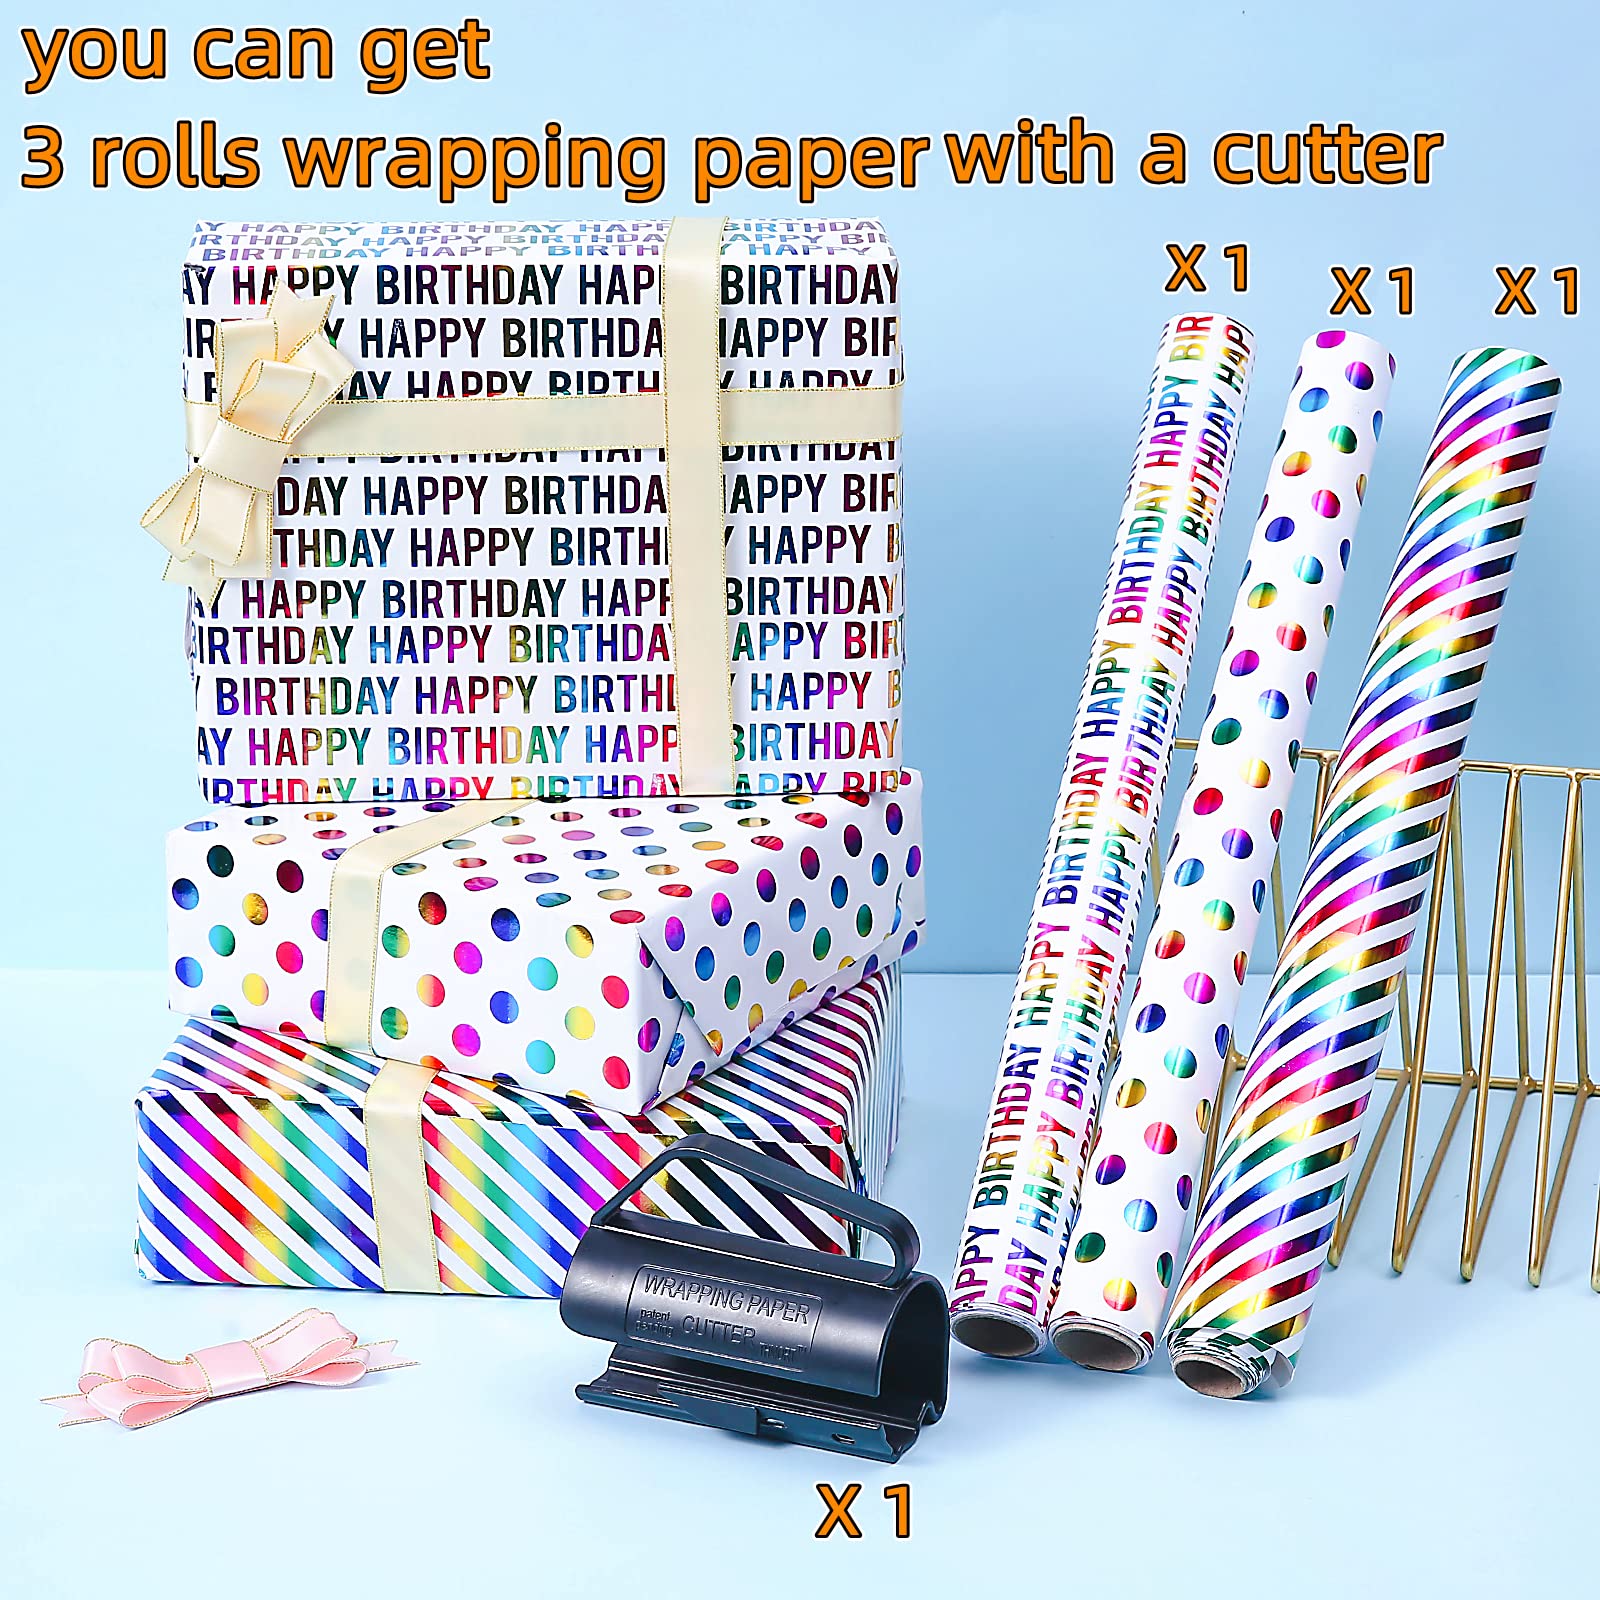 THMORT Colorful Foil Birthday Wrapping Paper Kit With Cutter for Kids & Adults, 17 x 120 Inch Mini Rolls With Rainbow Lettering